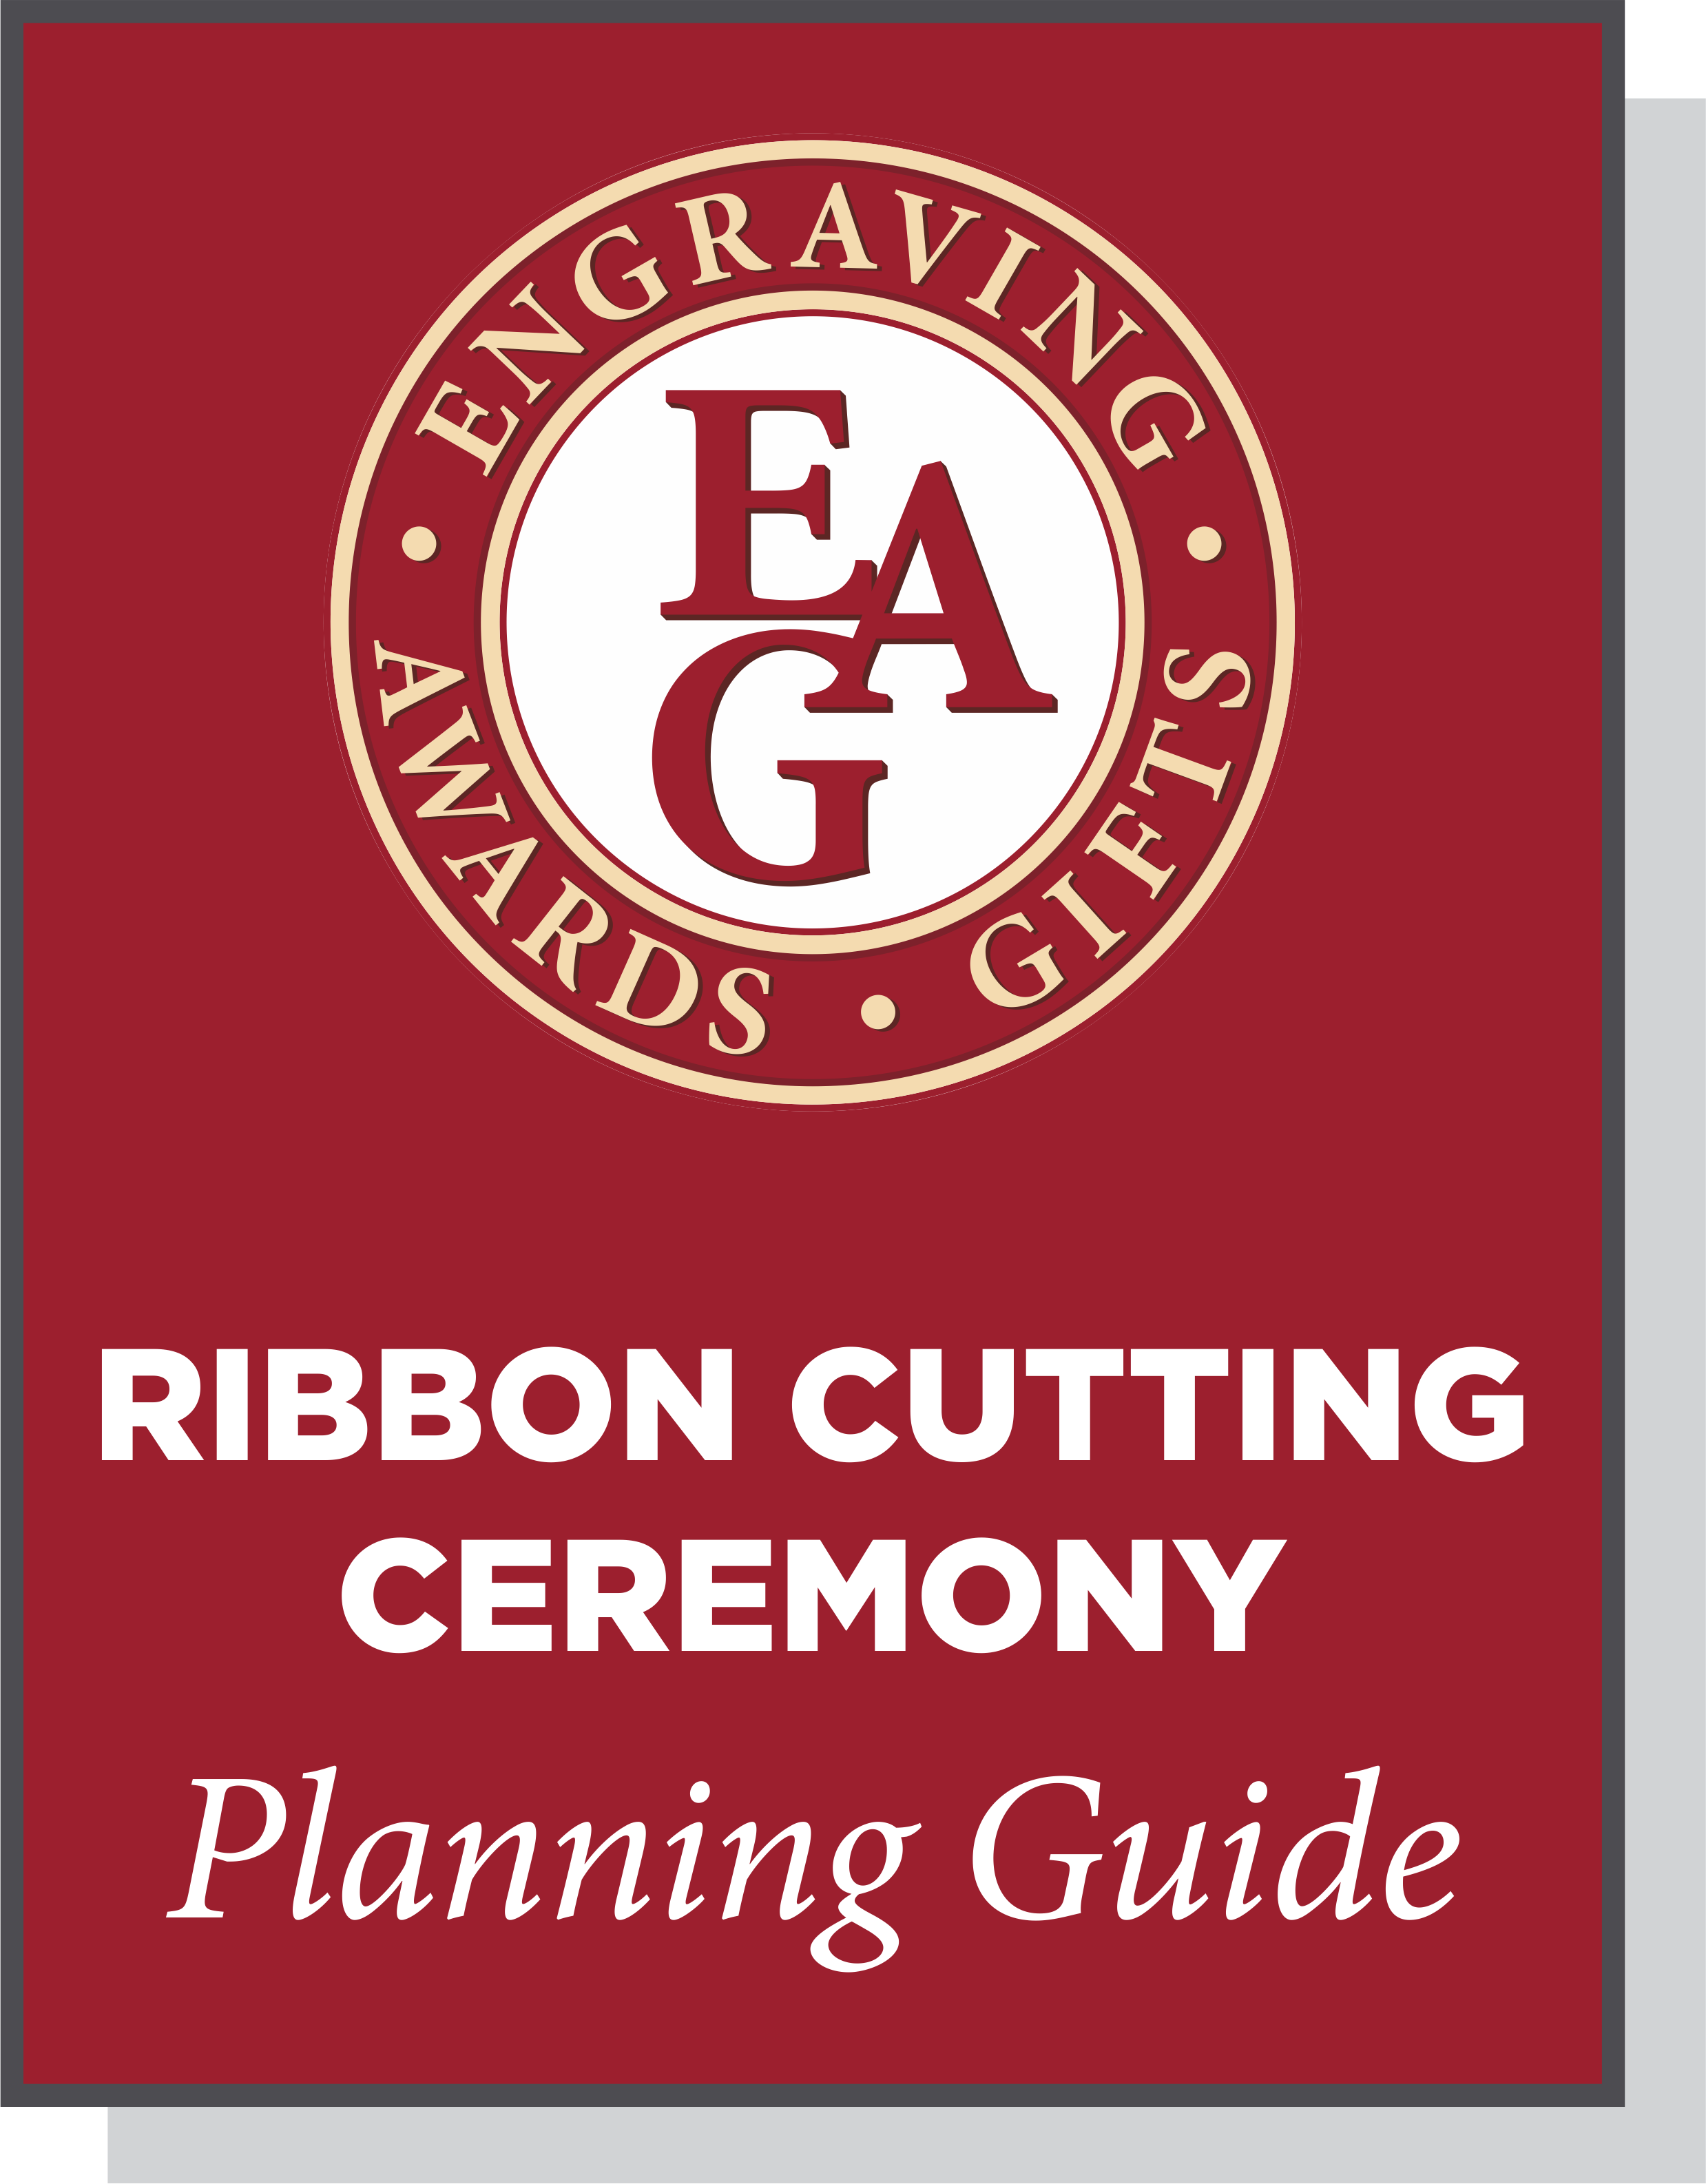 Ribbon Cutting Ceremony Planning Guide